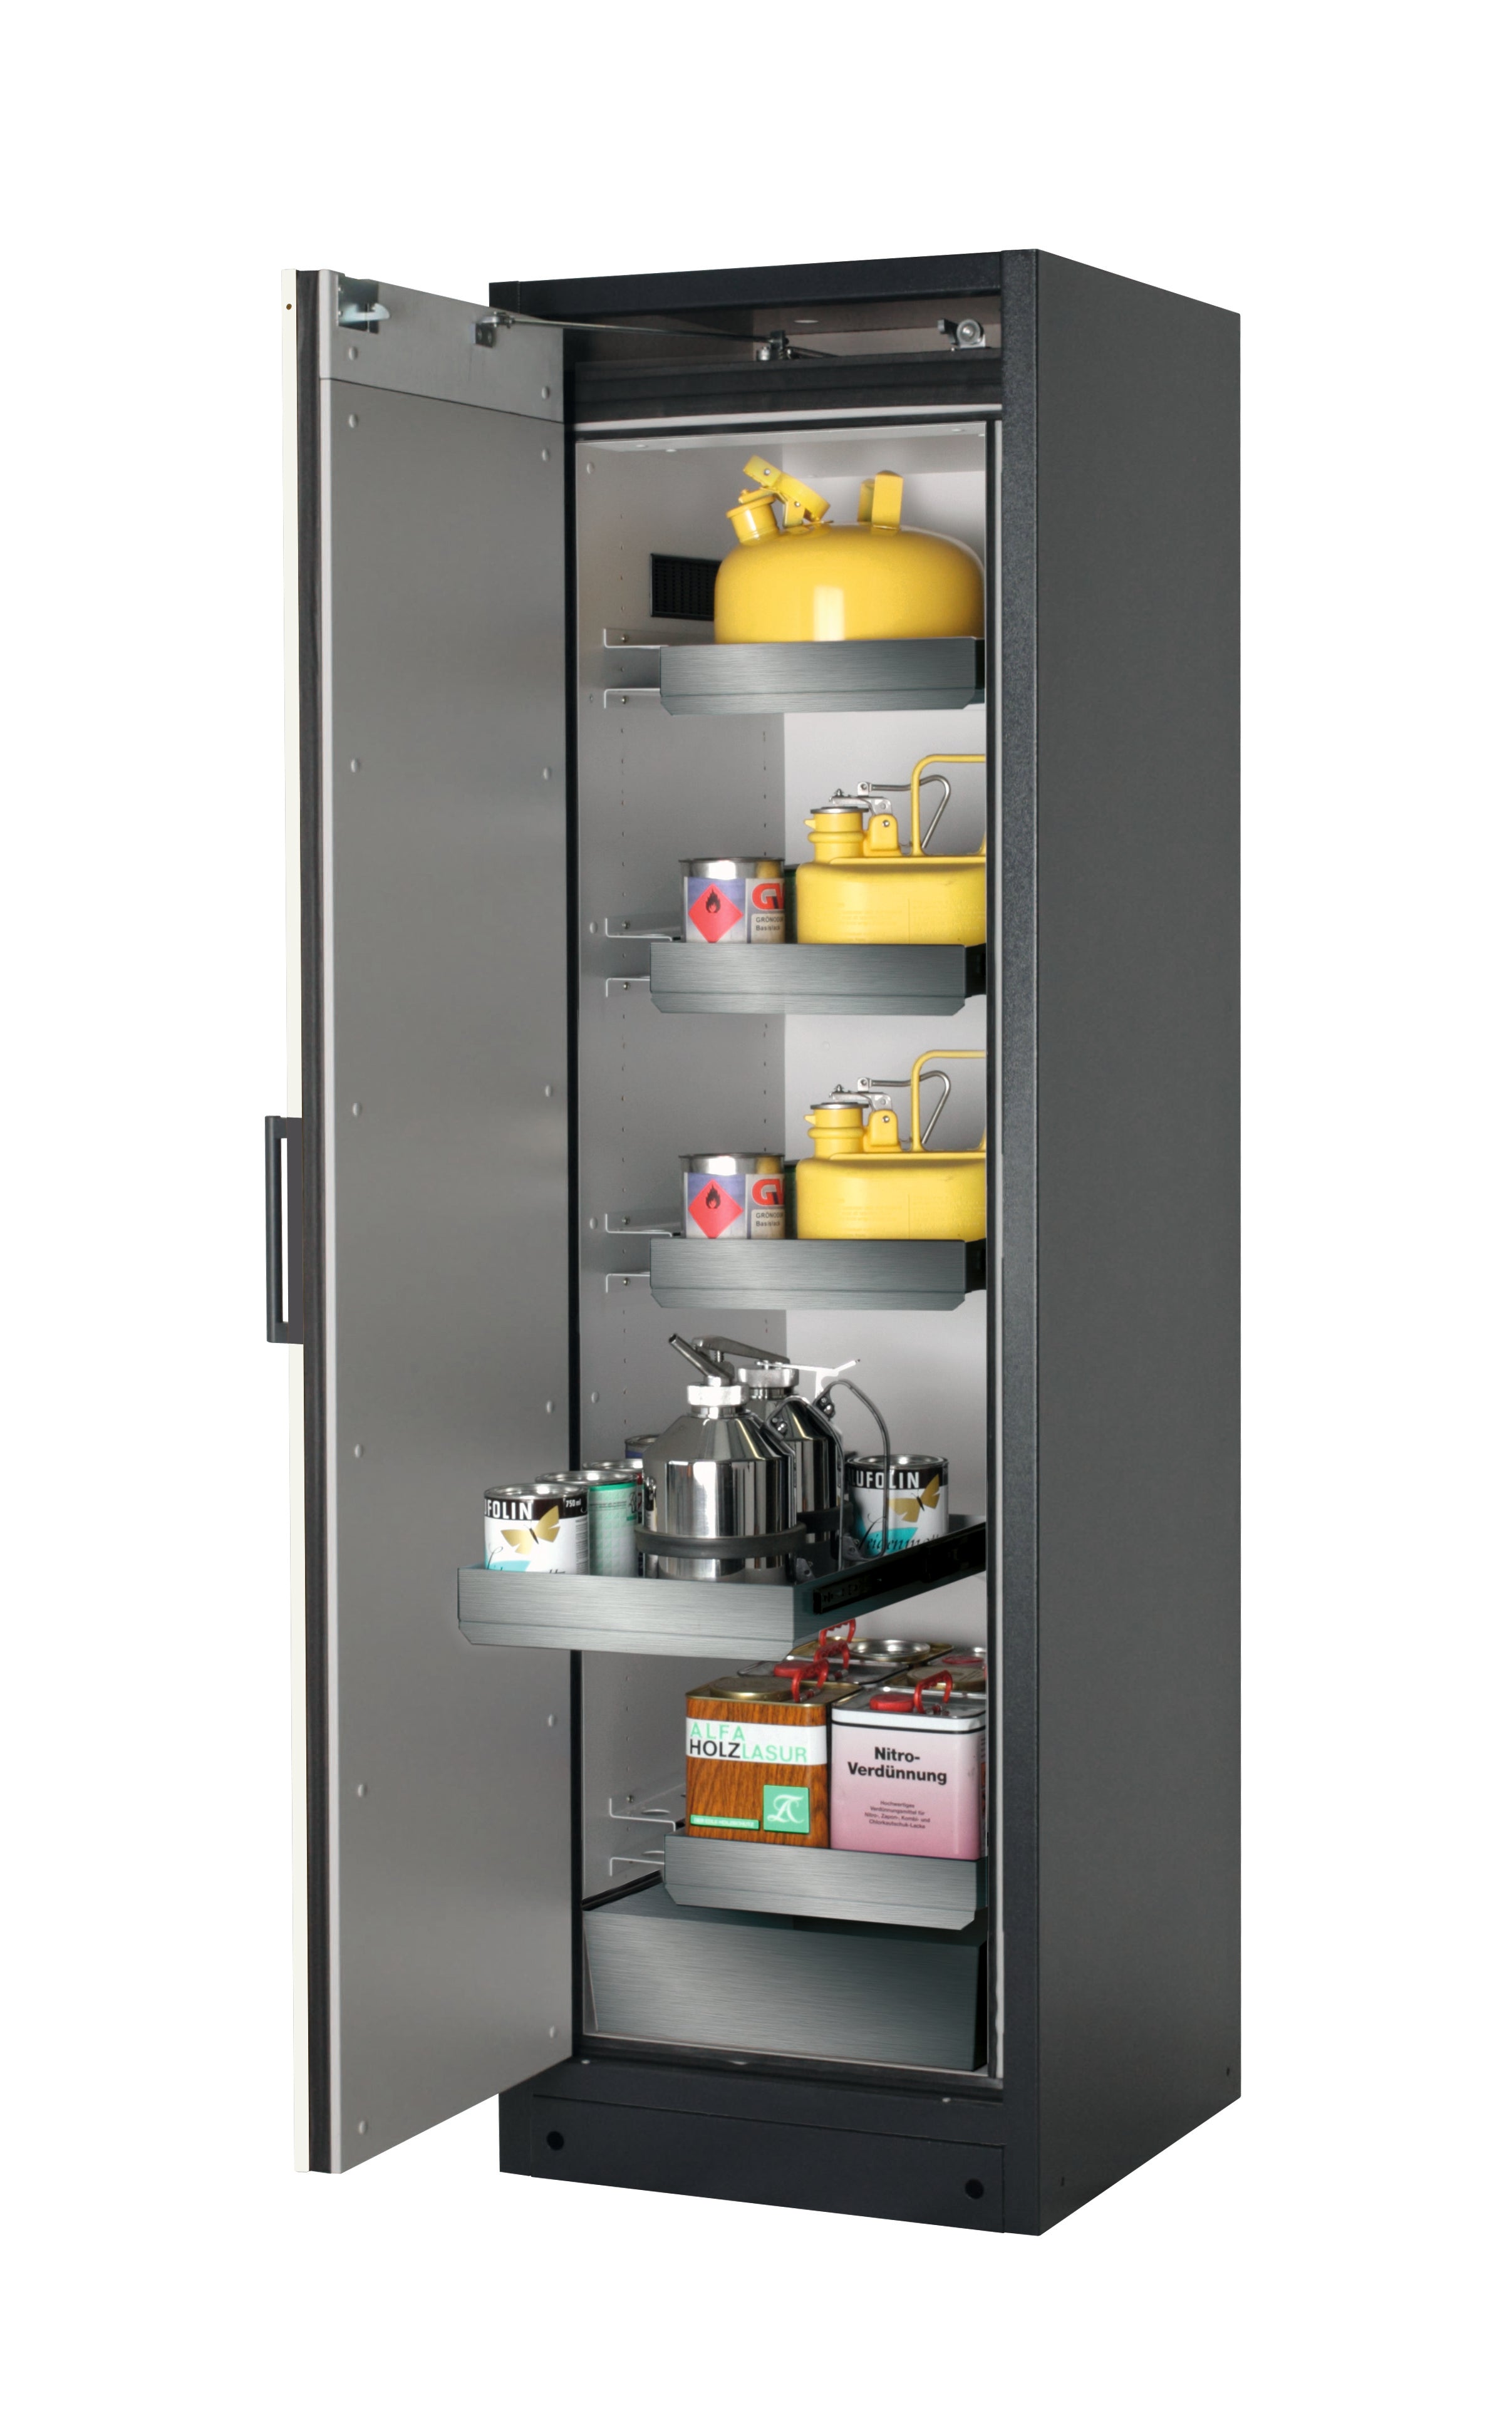 Type 90 safety storage cabinet Q-PEGASUS-90 model Q90.195.060.WDAC in asecos silver with 4x drawer (standard) (stainless steel 1.4301),